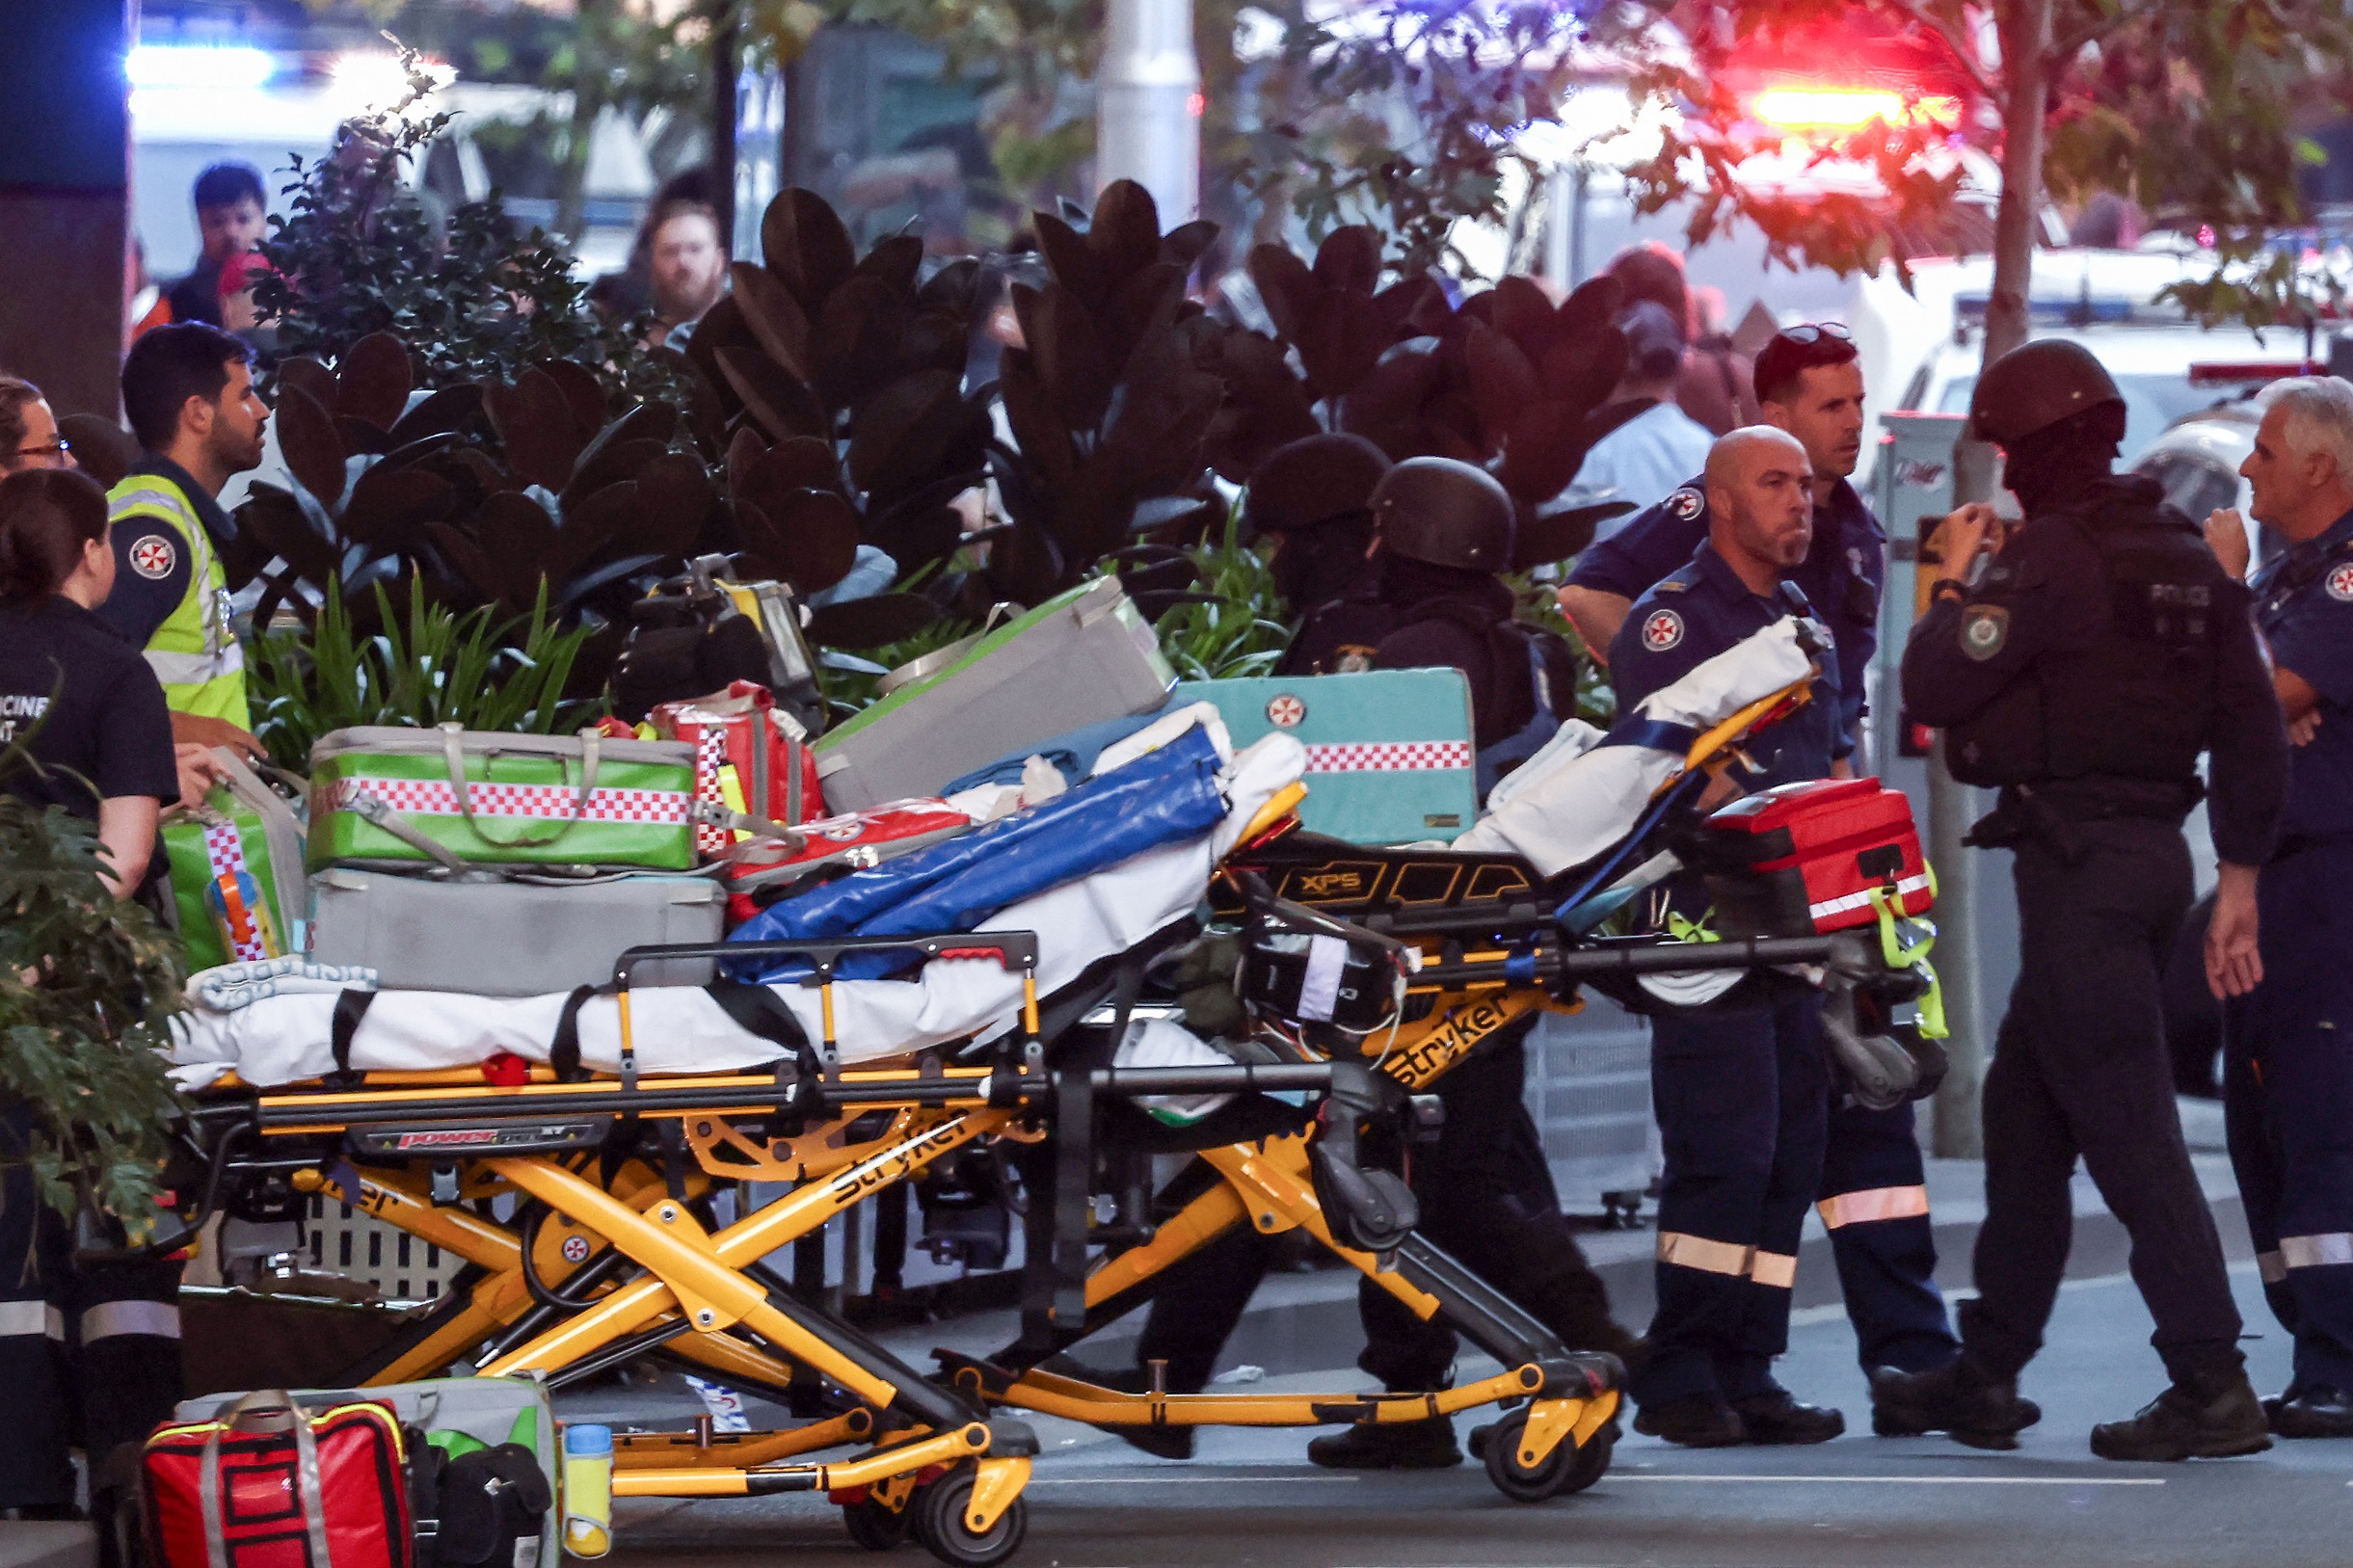 Five killed in Sydney shopping center attack